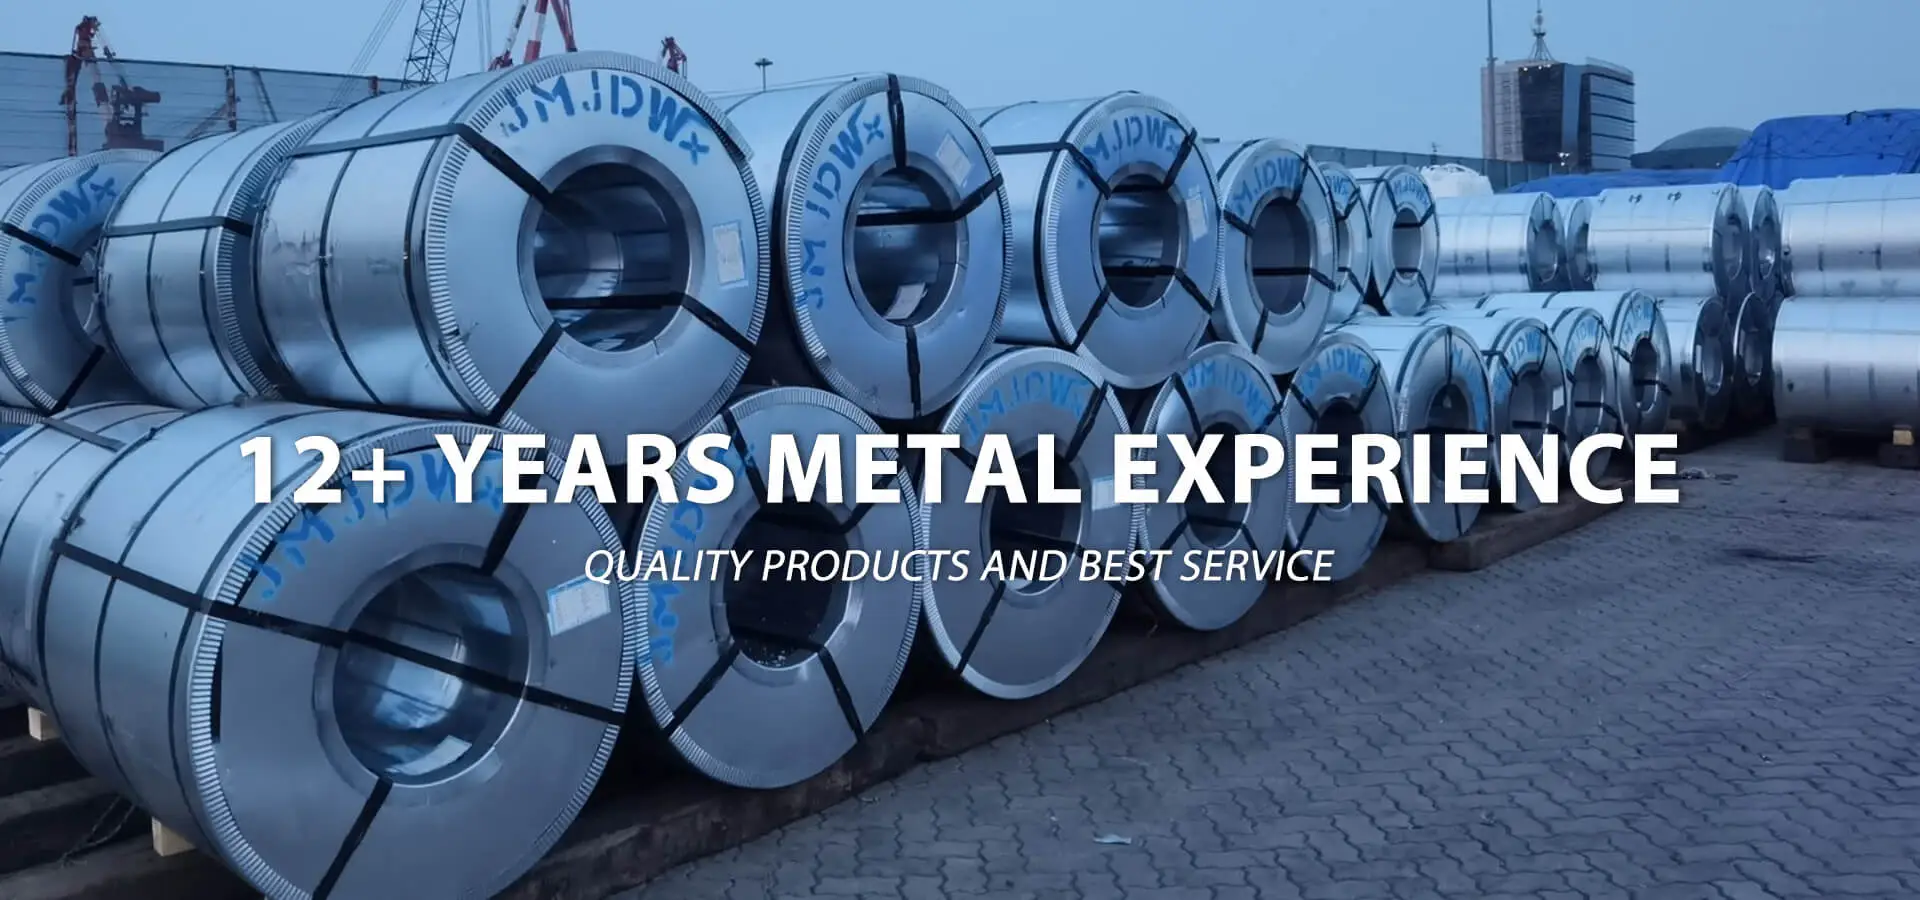 JMJDWX - 12+ YEARS QUALITY METAL SUPPLIERS AND BEST SERVICE